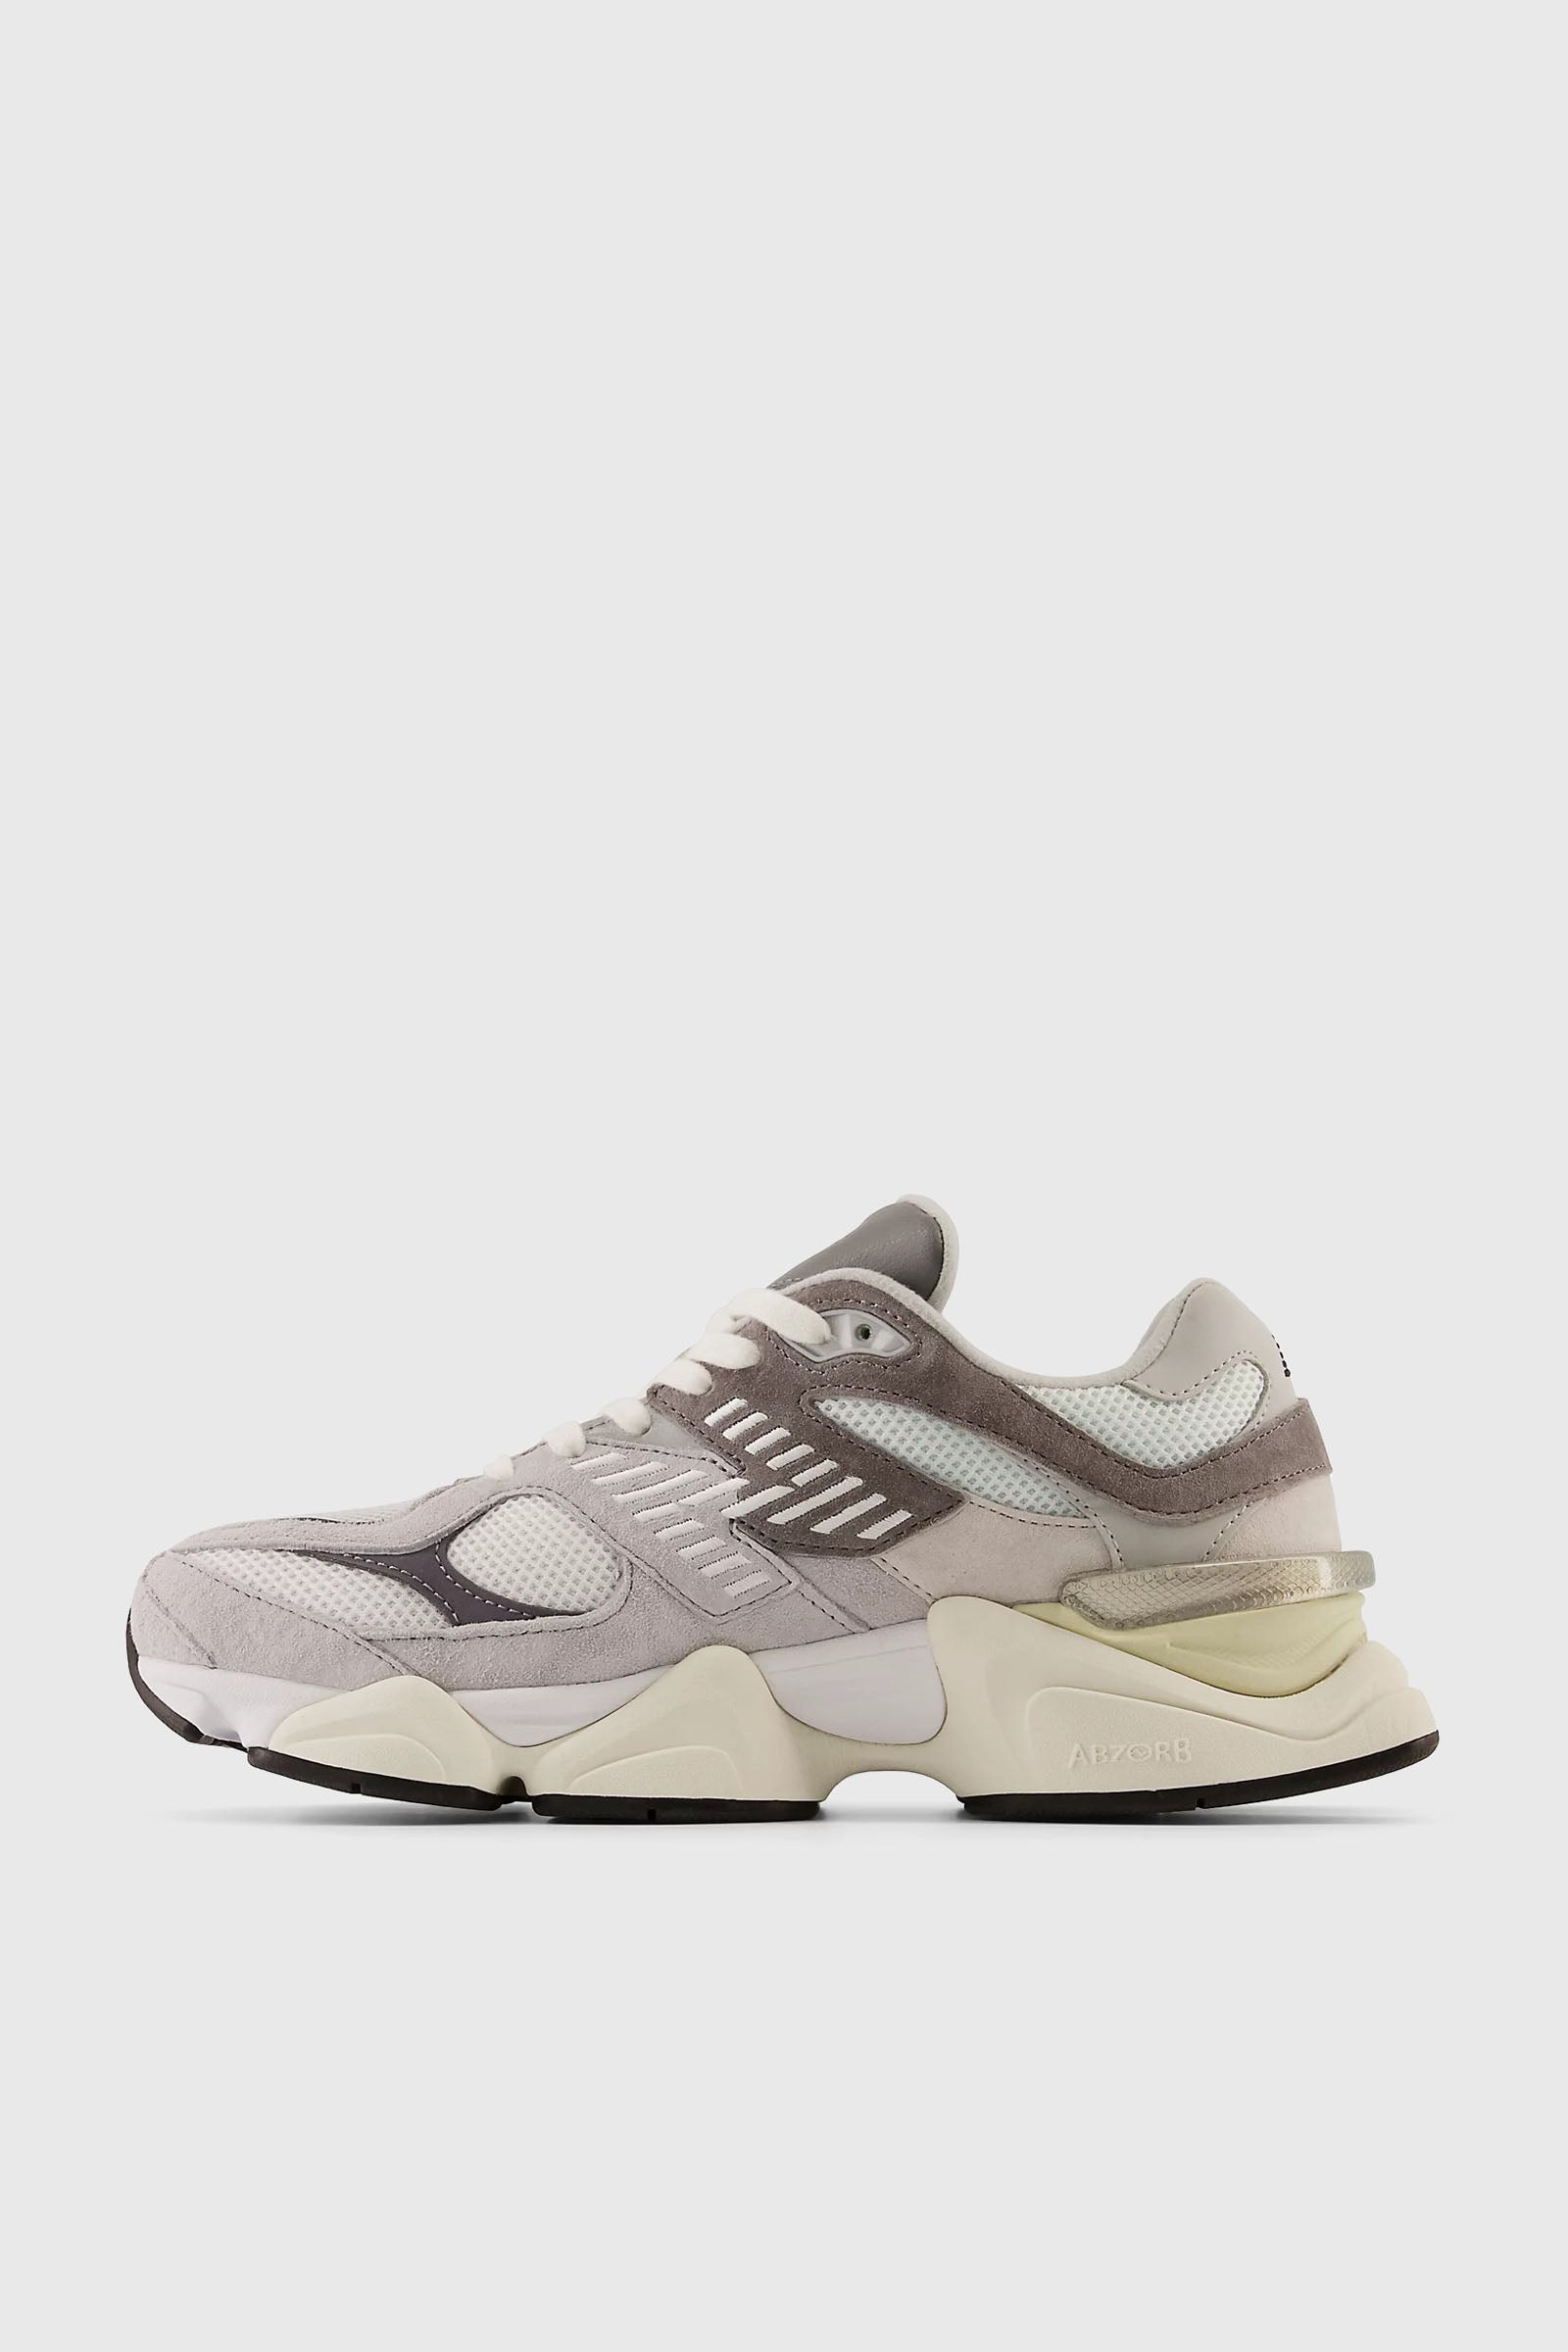 H1 Title: New Balance 9060 Synthetic Grey Sneaker - 6